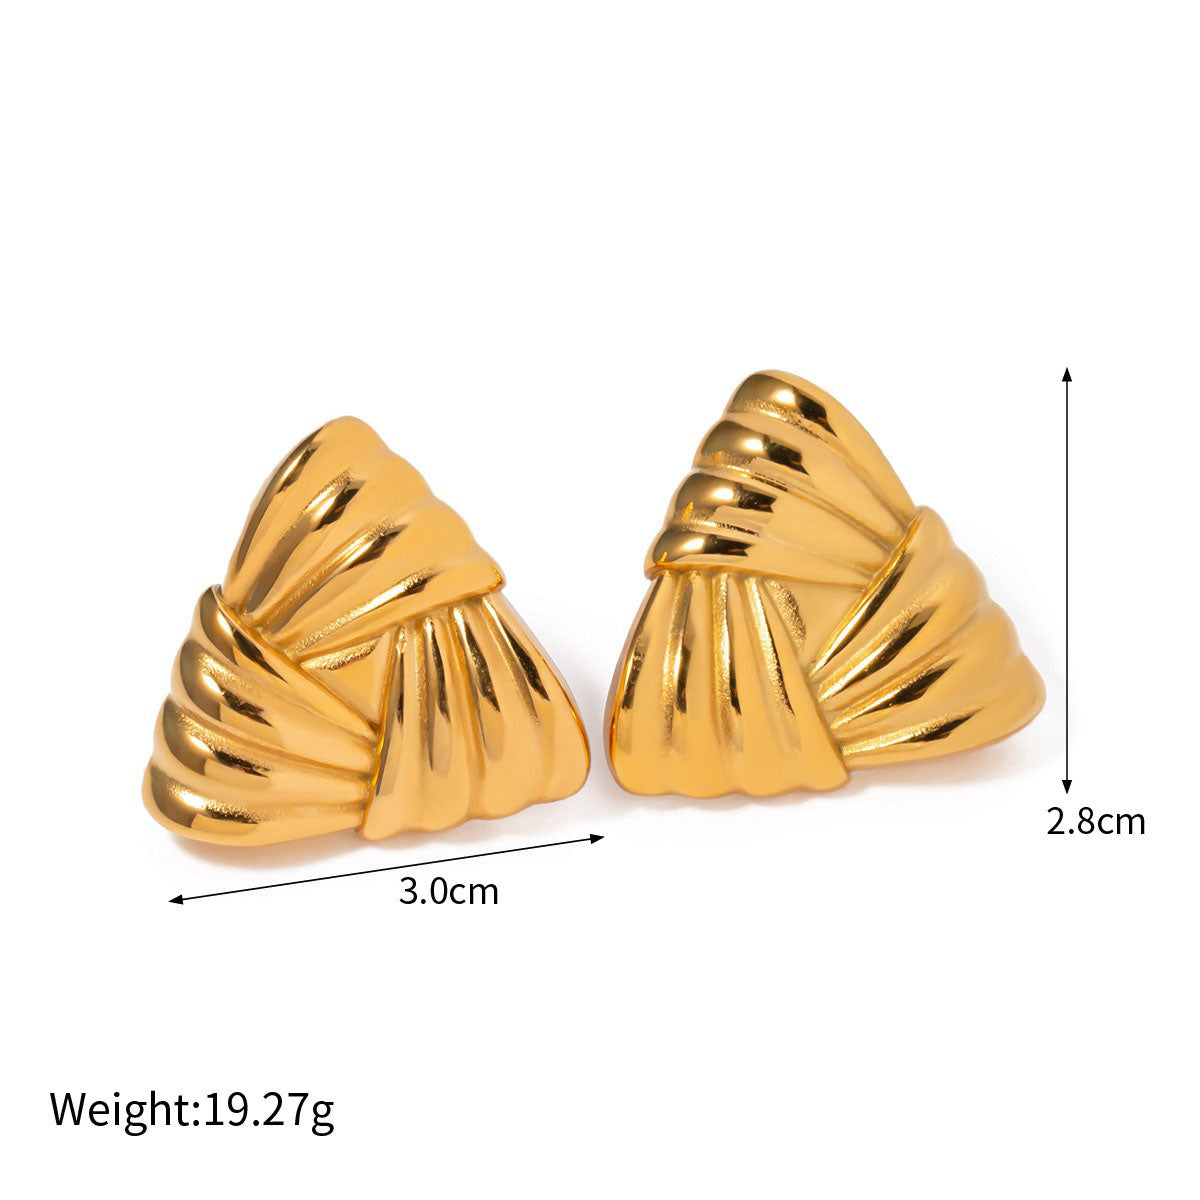 18k gold classic fashion triangle with braided texture design earrings